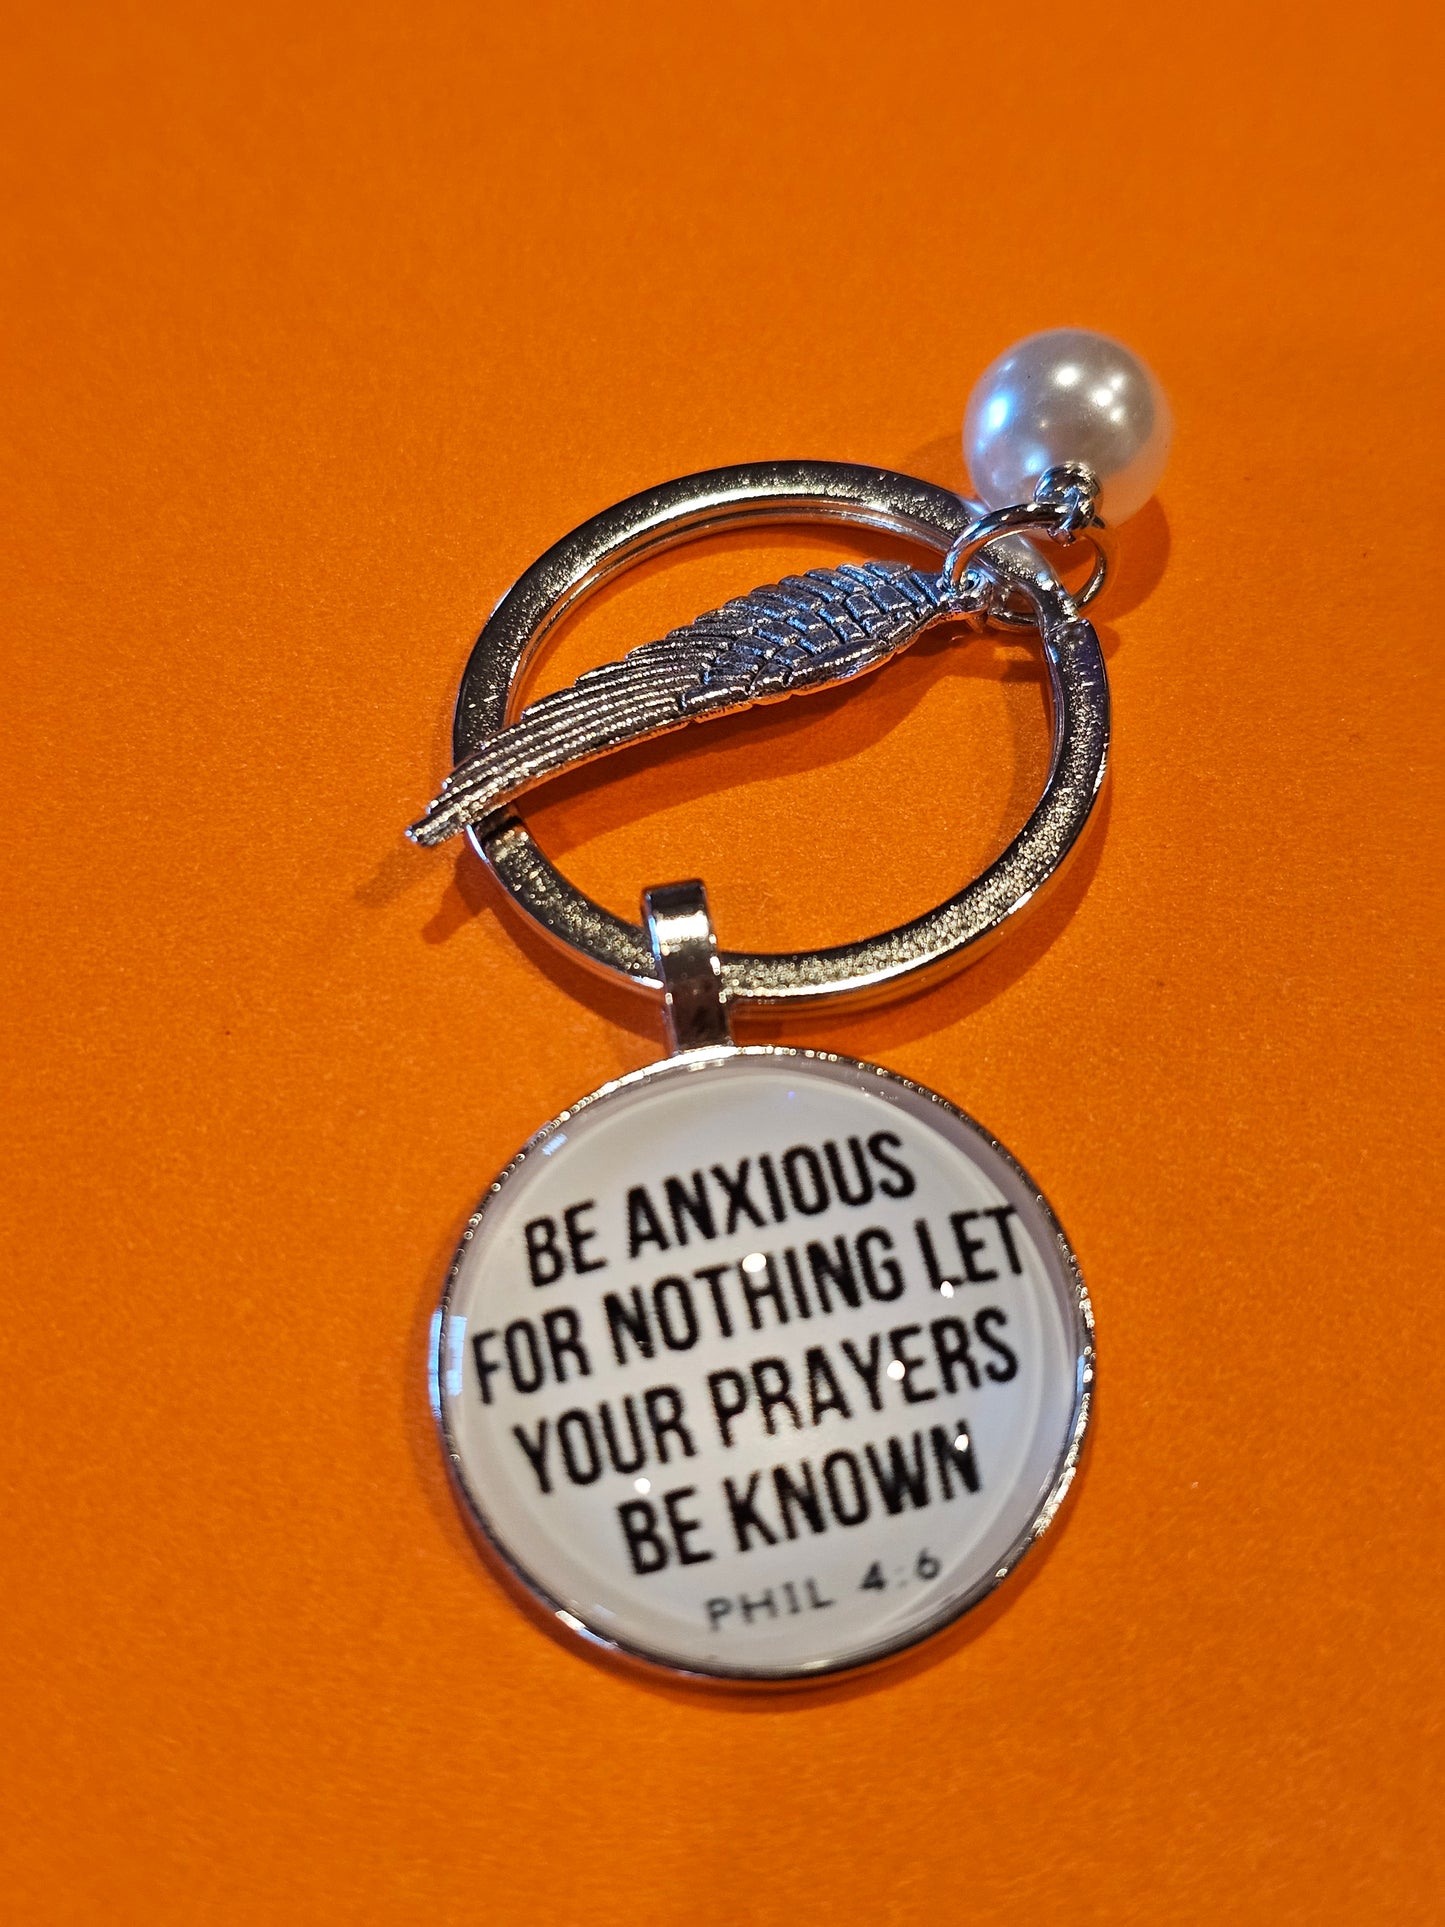 1" x 1" 3D Key Rings Bible Verse Scripture Quote